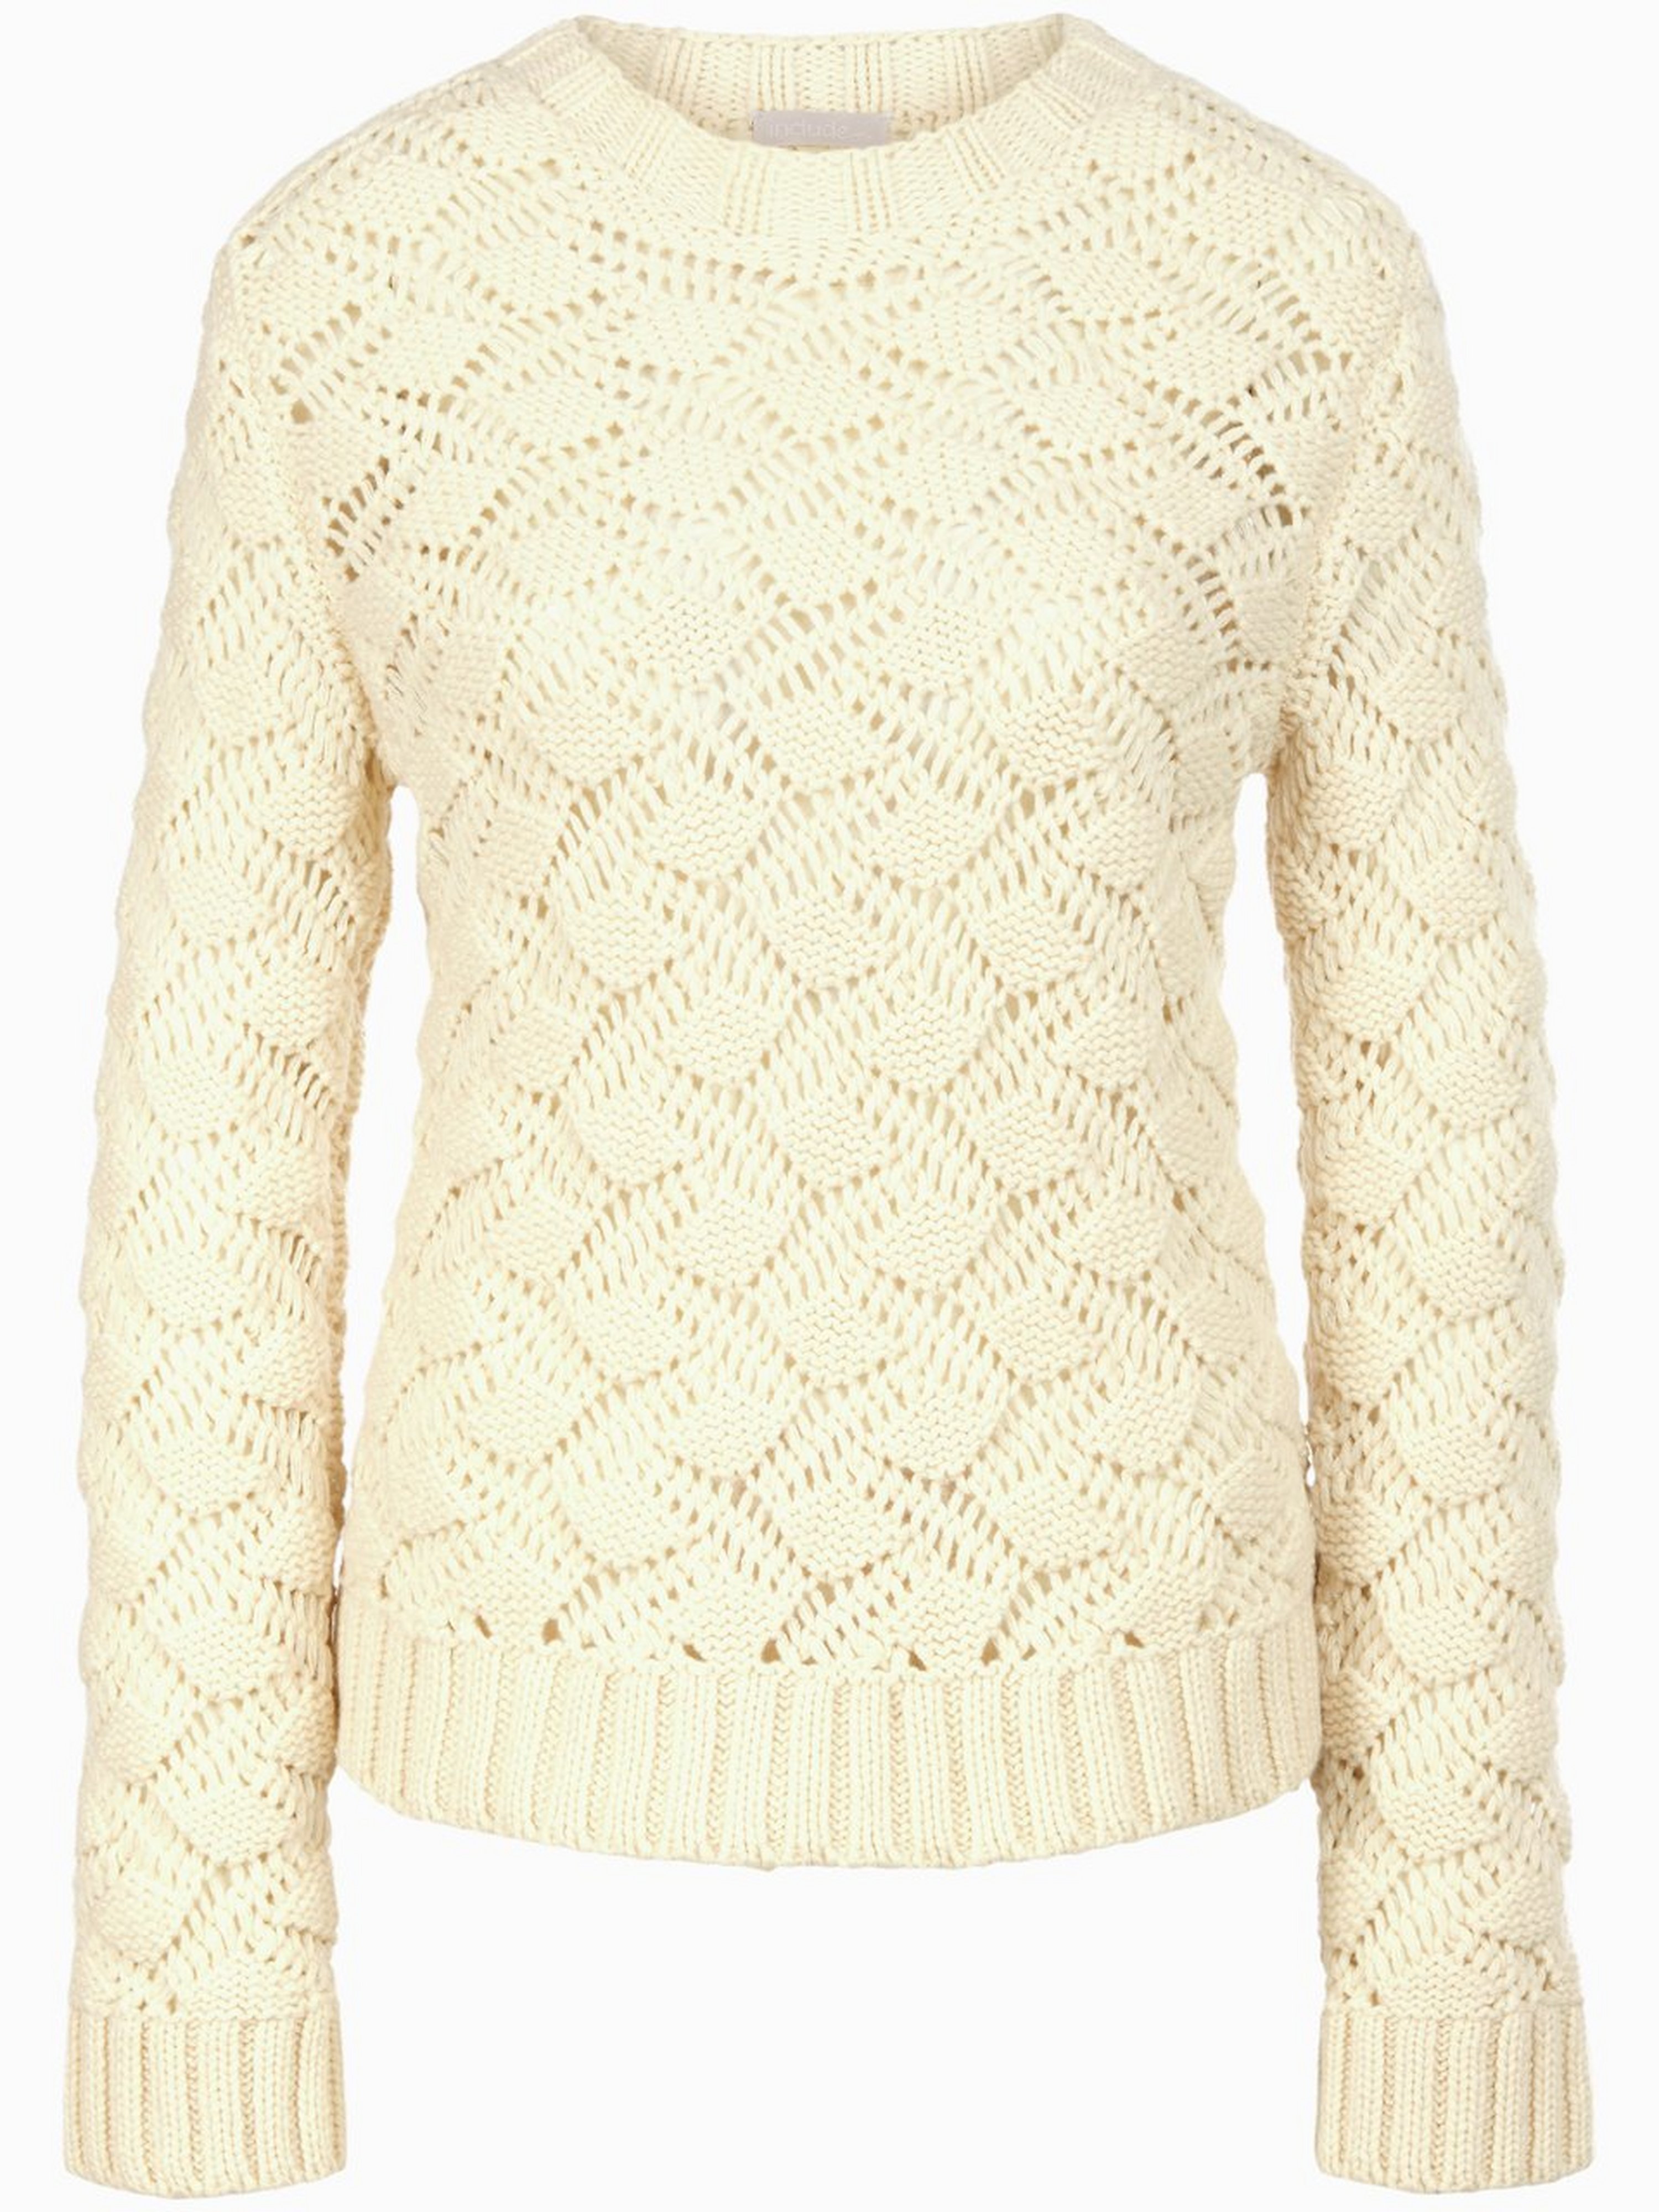 Le pull 100% cachemire  include beige taille 38